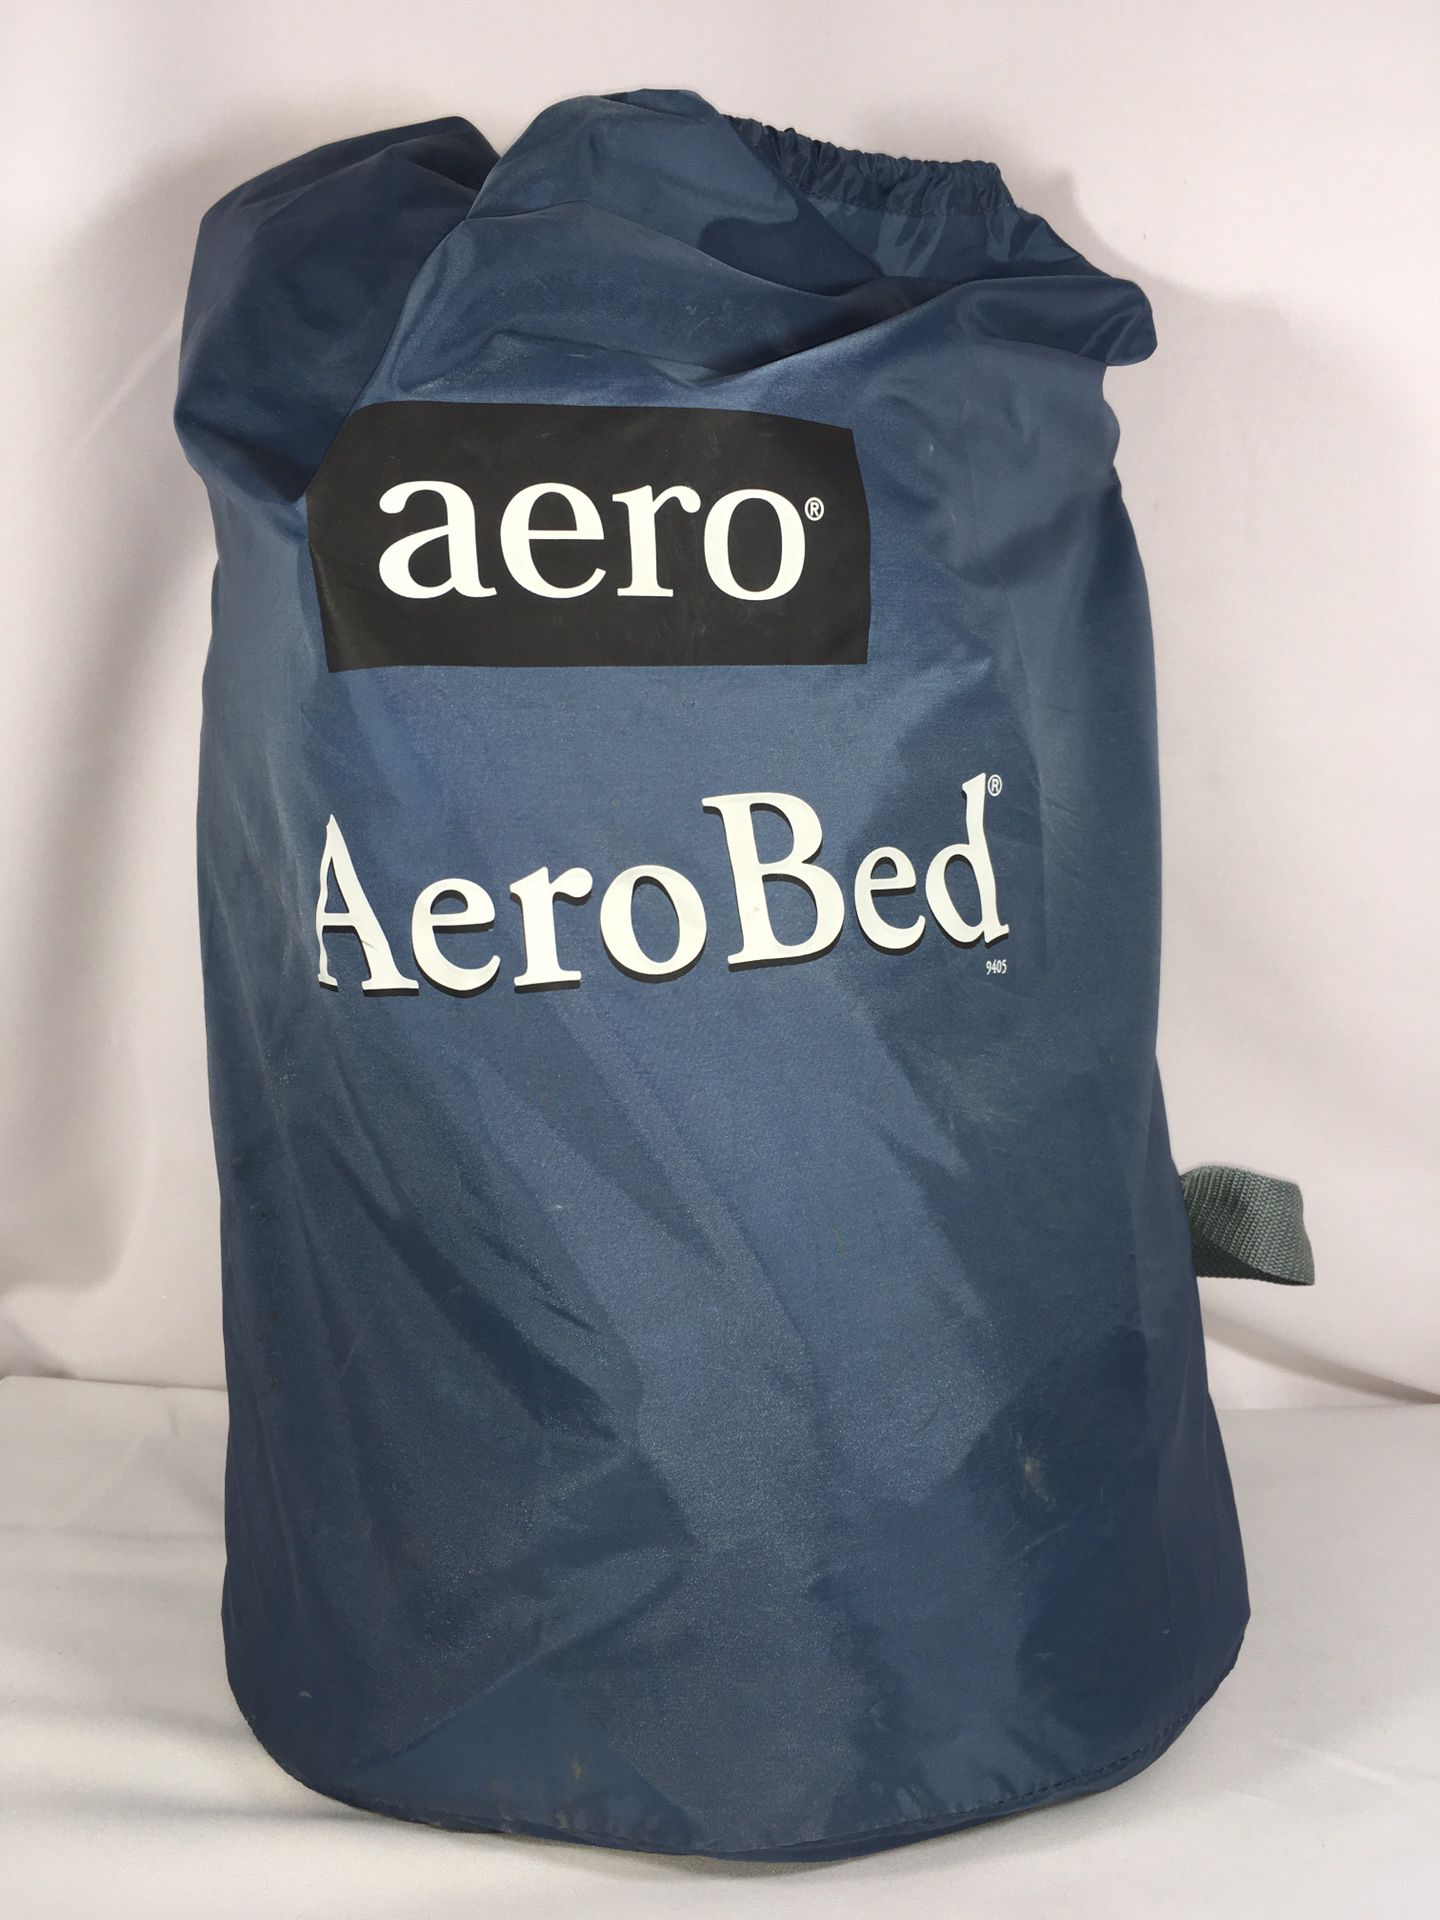 AERO BED W/BUILT-IN PUMP & MATTRESS COVER “TWIN SIZE” Excellent Condition